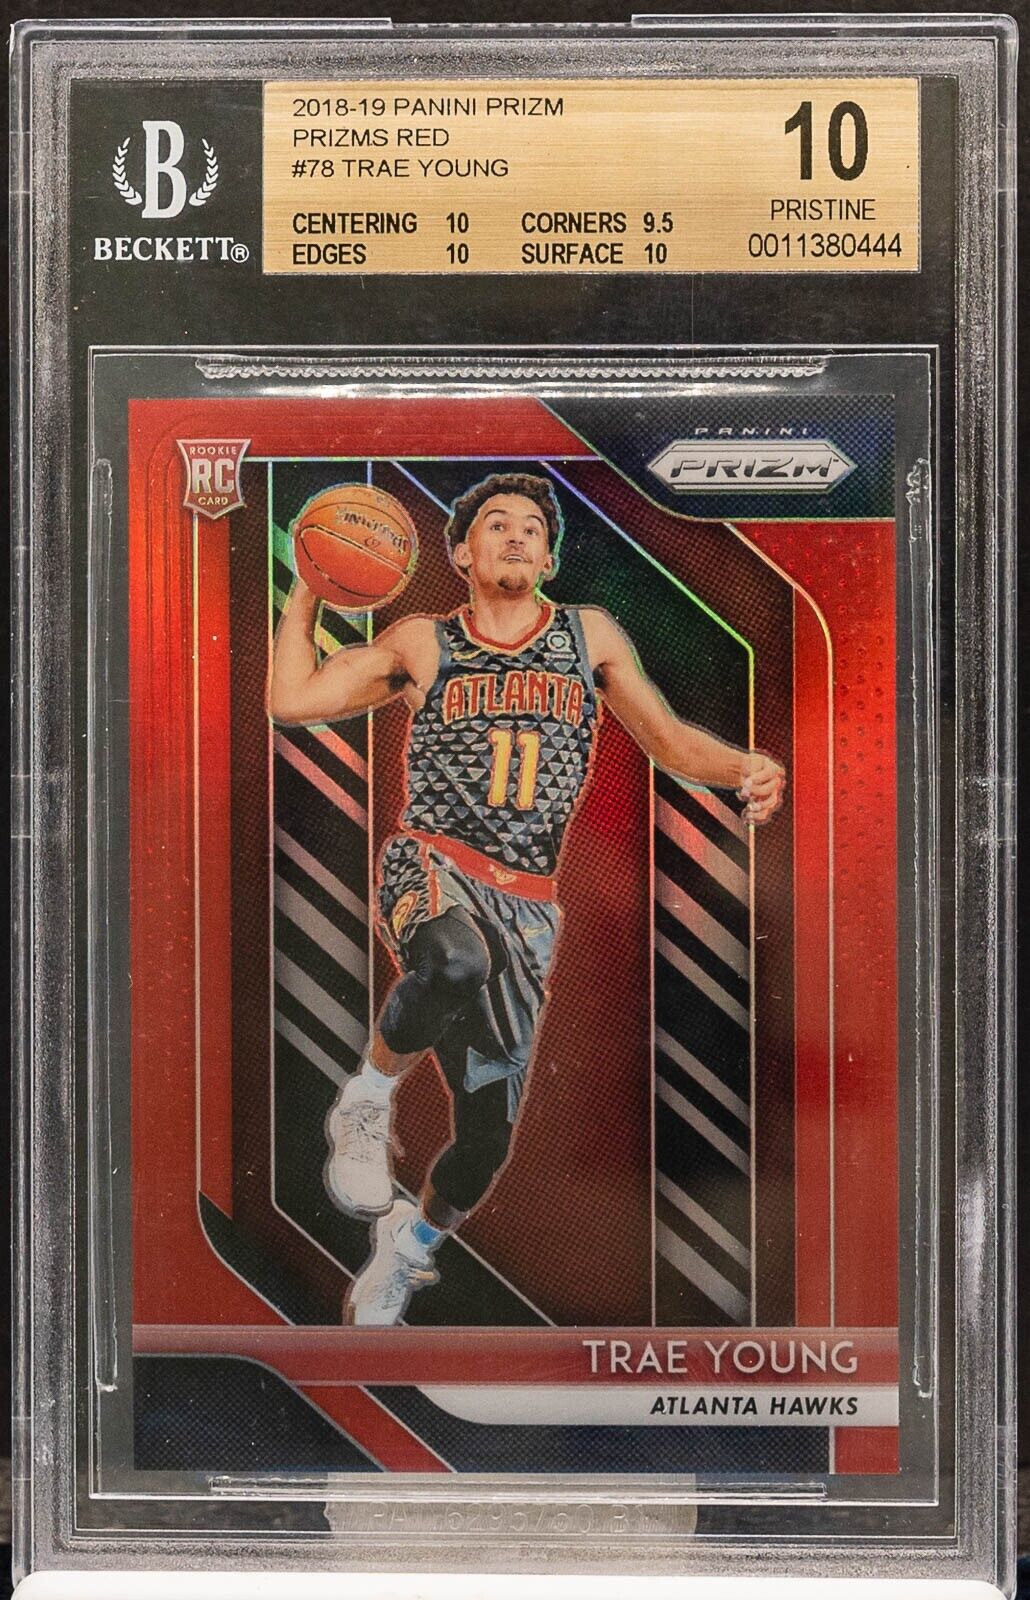 0444 TRAE YOUNG 2018 Panini Prizm 78 Red Prizm RC Rookie 258/299 BGS 10